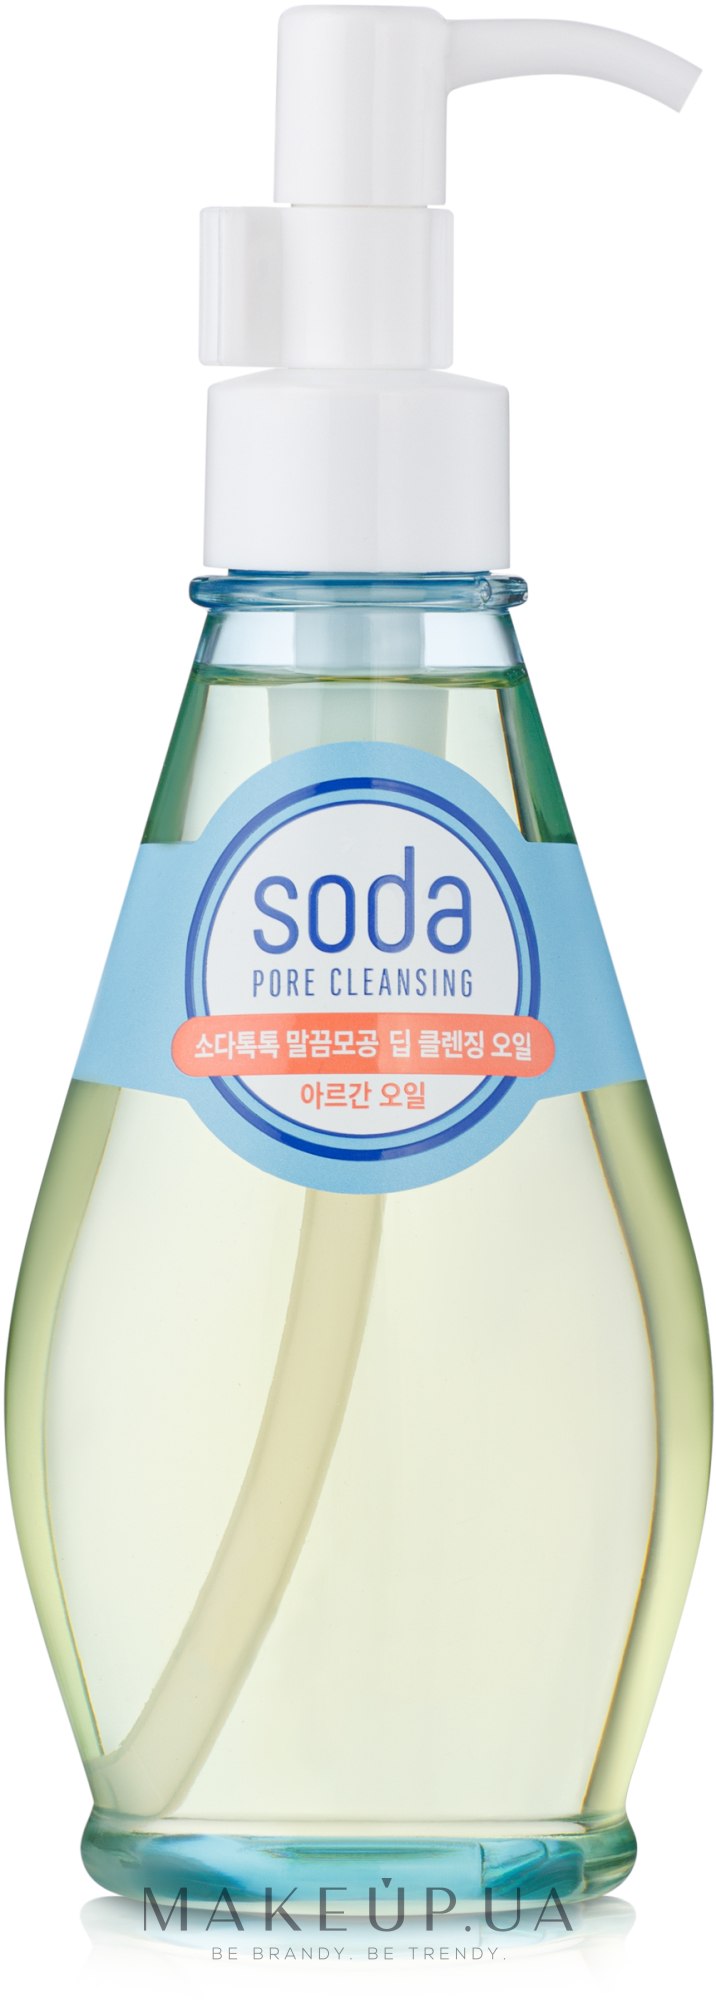 Soda pore deep cleansing. Гидрофильное масло Holika Holika Soda Pore Cleansing- Deep Cleansing Oil ,150ml. Гидрофильное масло Soda Holika Holika. Holika Soda Tok Tok clean Pore Deep Cleansing Oil. Holika Holika Soda Tok Tok clean Pore гидрофильное масло.